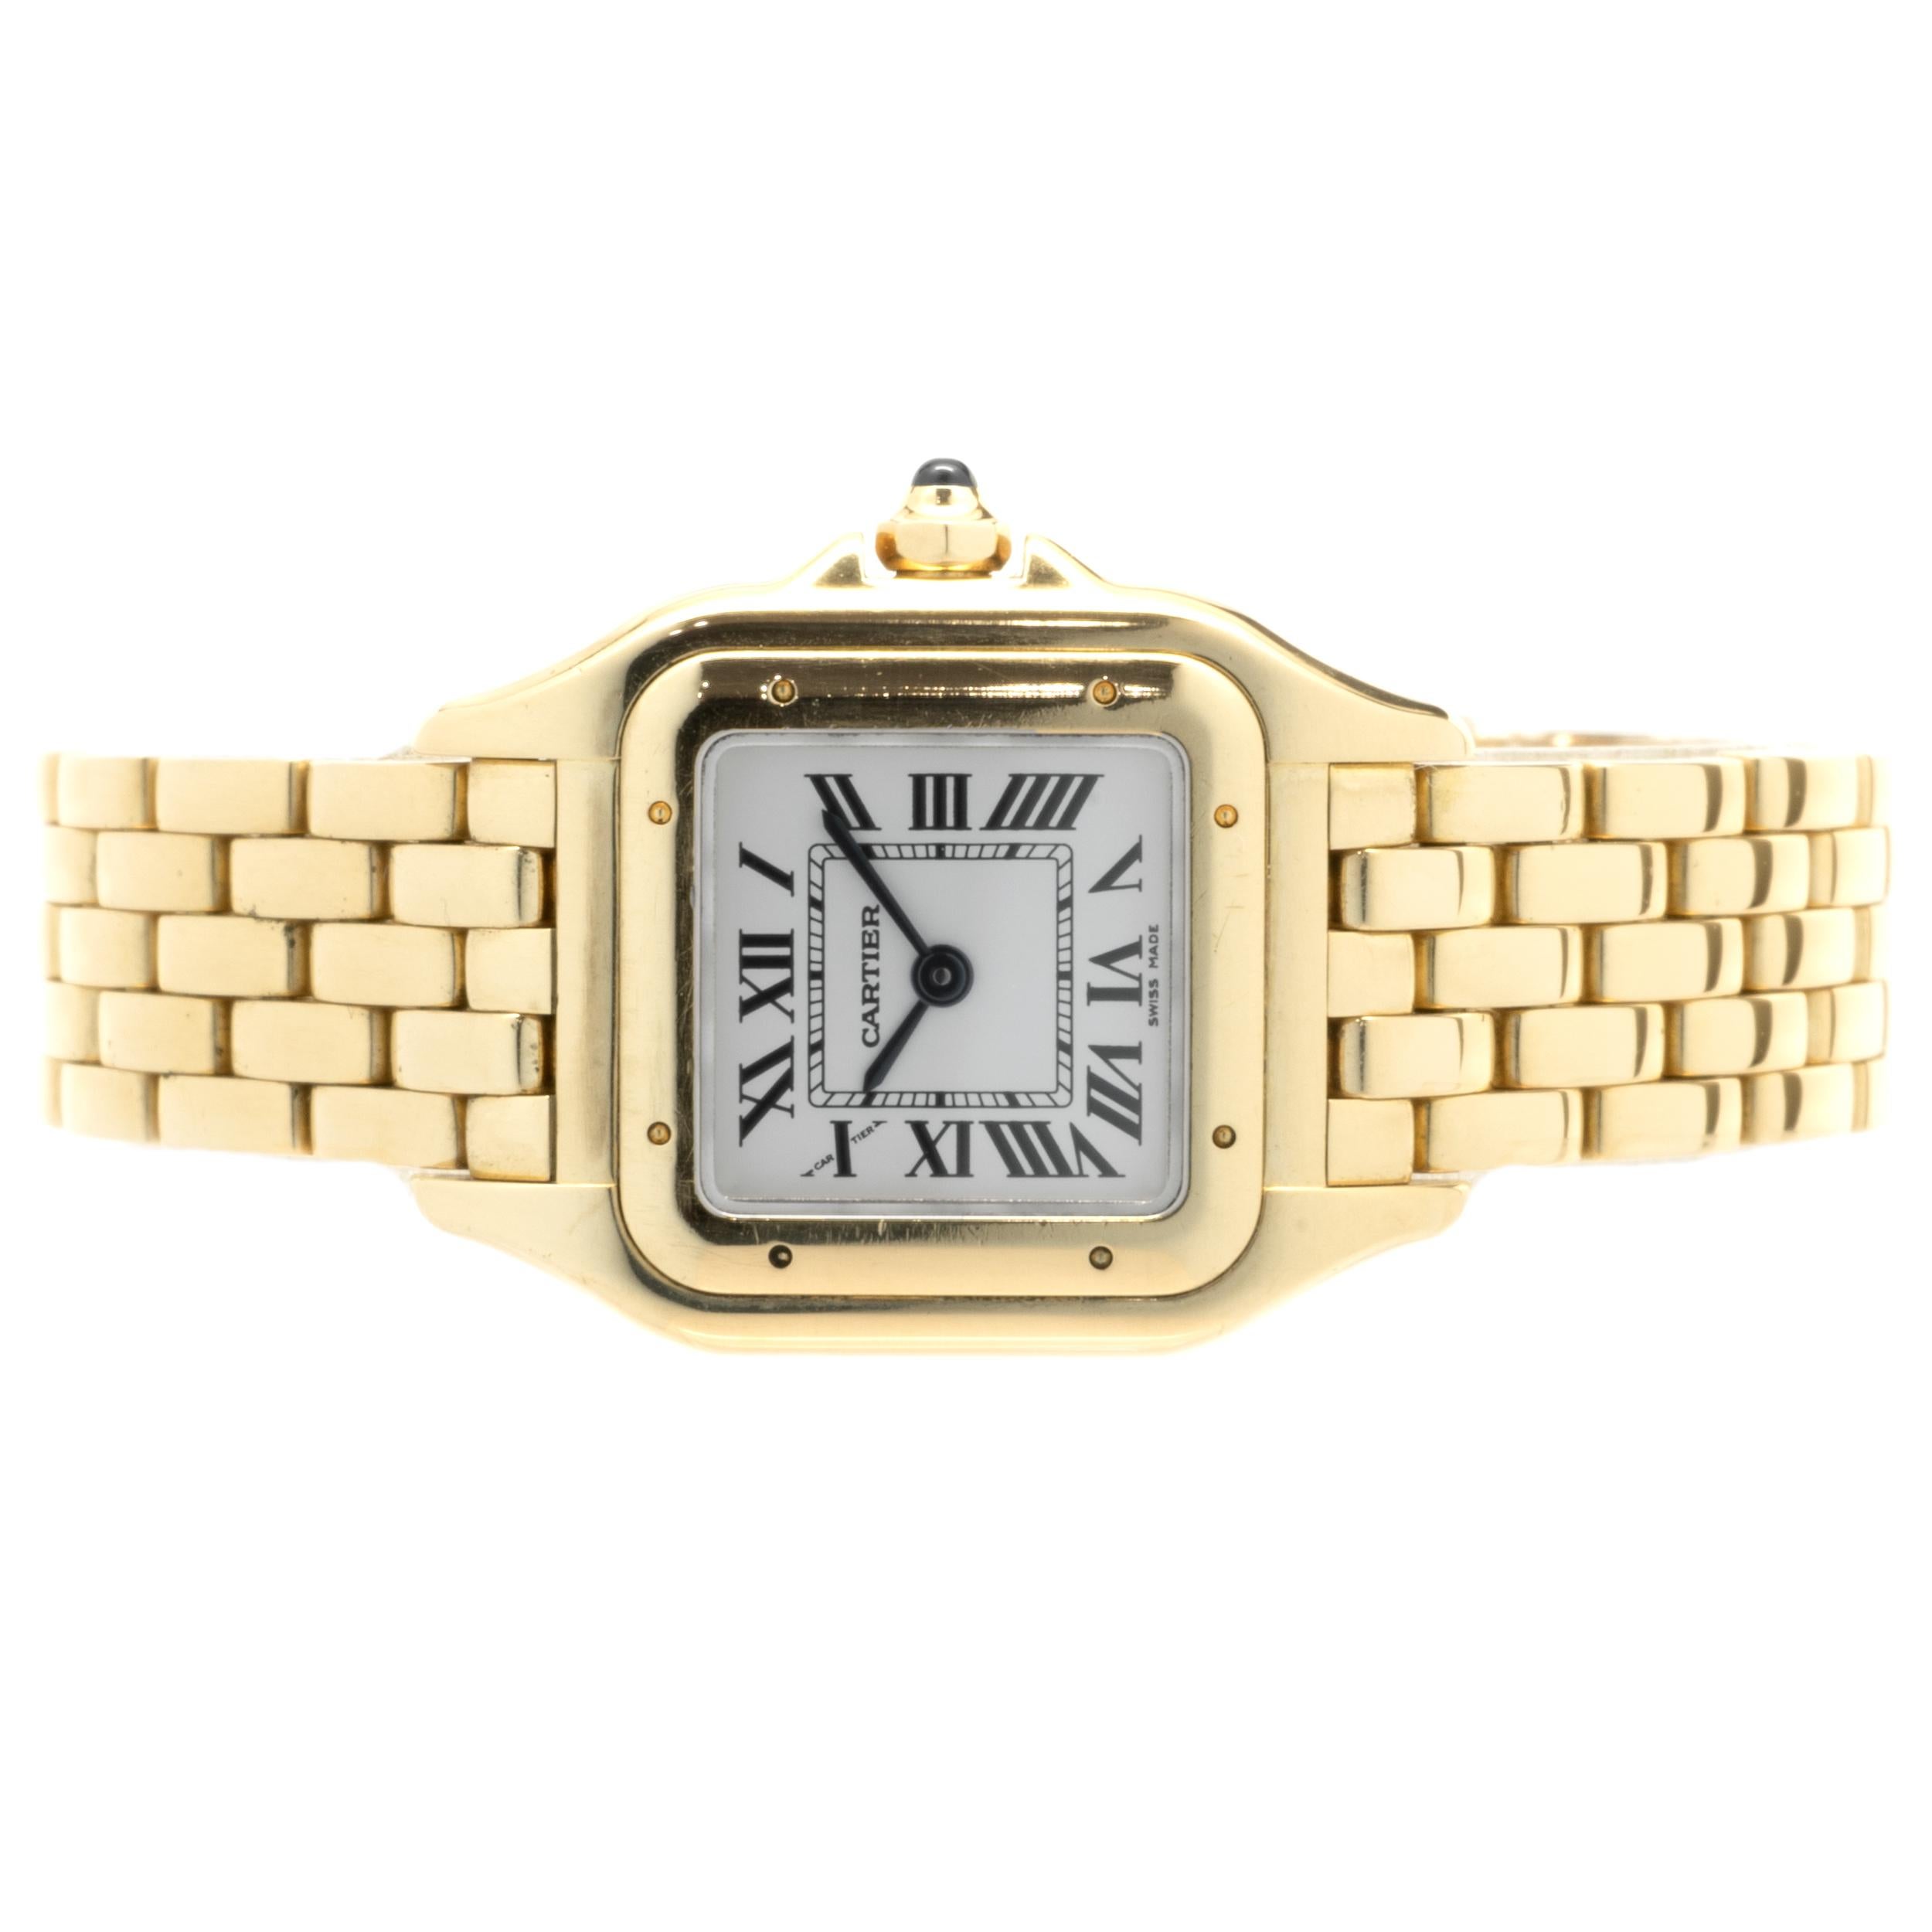 Movement: quartz
Function: hours, minutes
Case: 25 X 21mm 18K yellow gold rectangle case, push pull crown, sapphire crystal,
Dial: silver roman dial, blue sword sweeping hands
Band: 18K yellow gold Cartier panther bracelet, fold over clasp
Serial #: